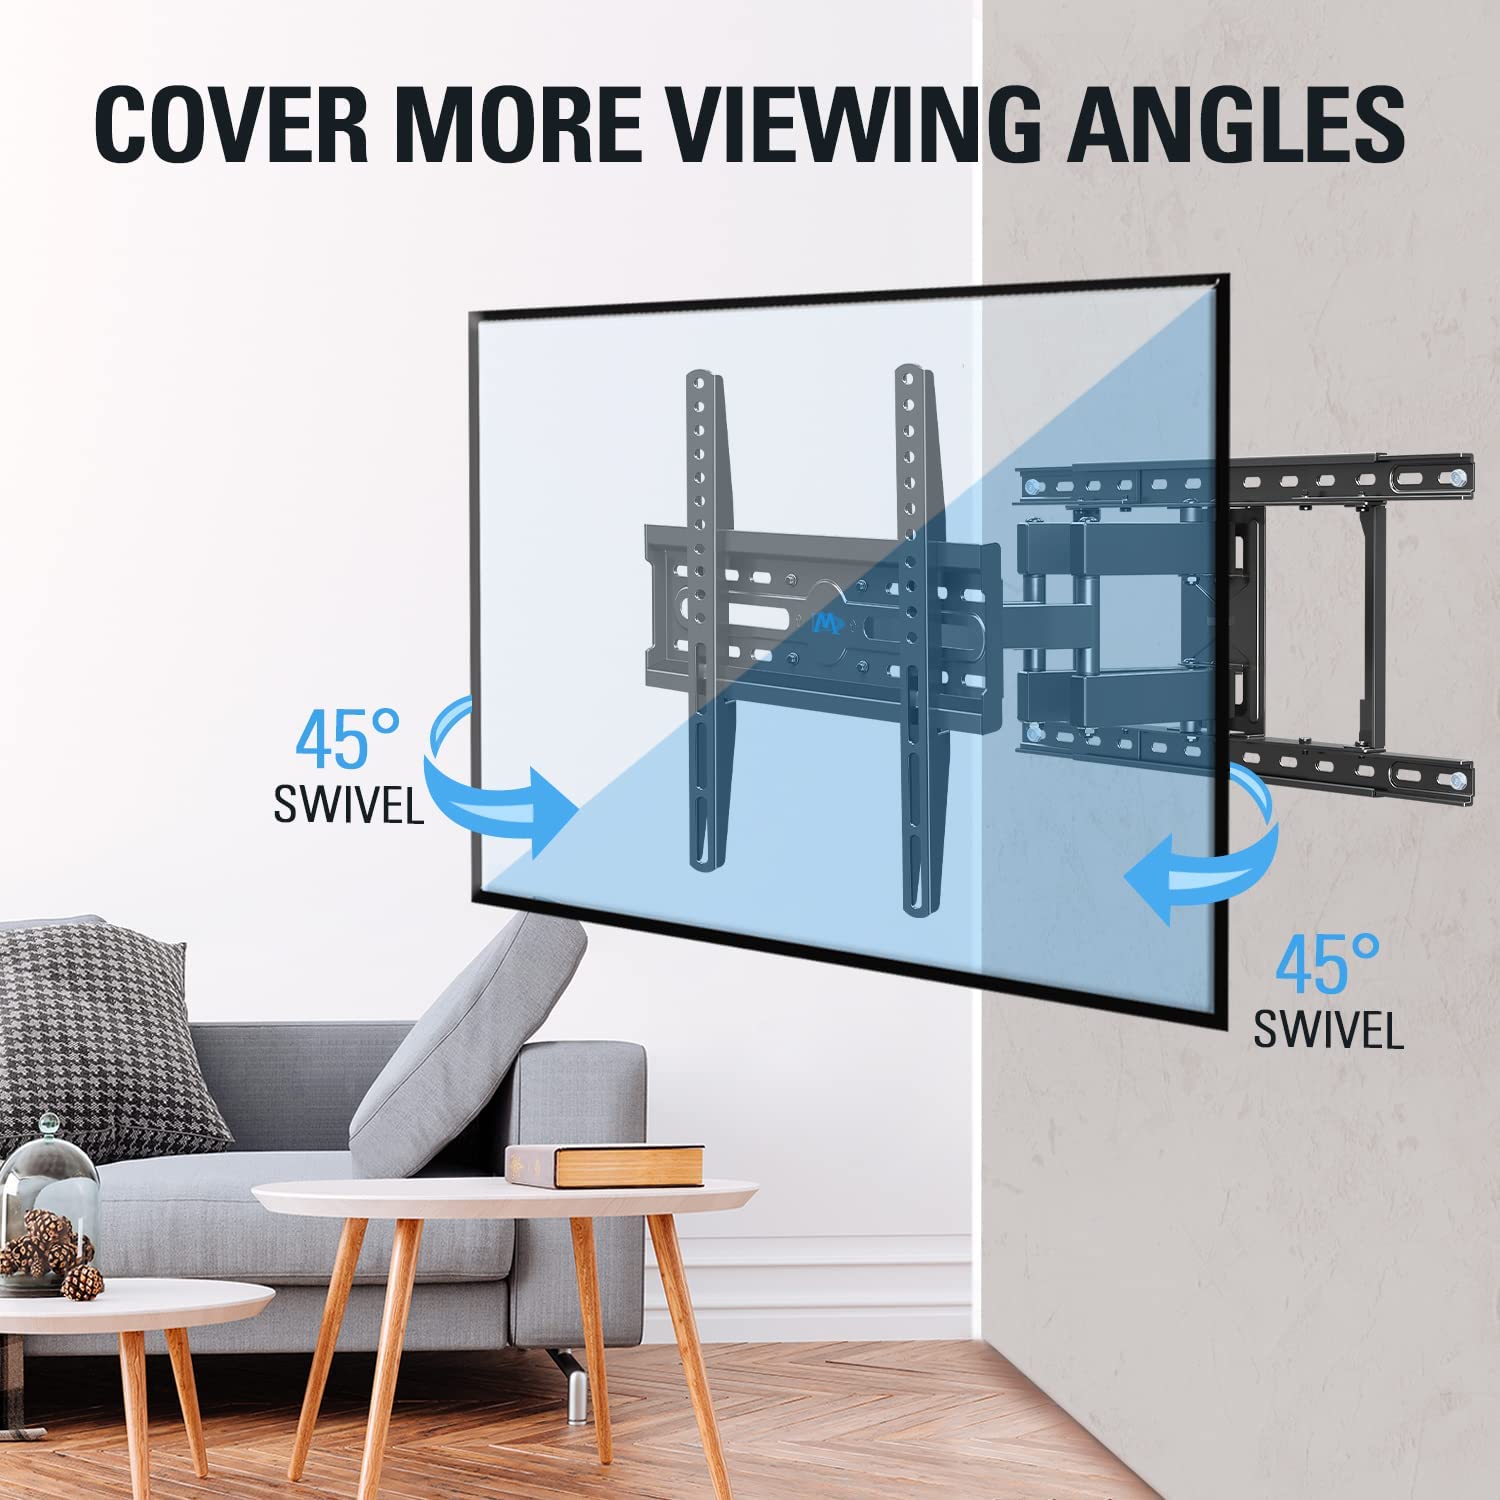 45° of swivel to watch tv from different seat in living room, kitchen or bedroom